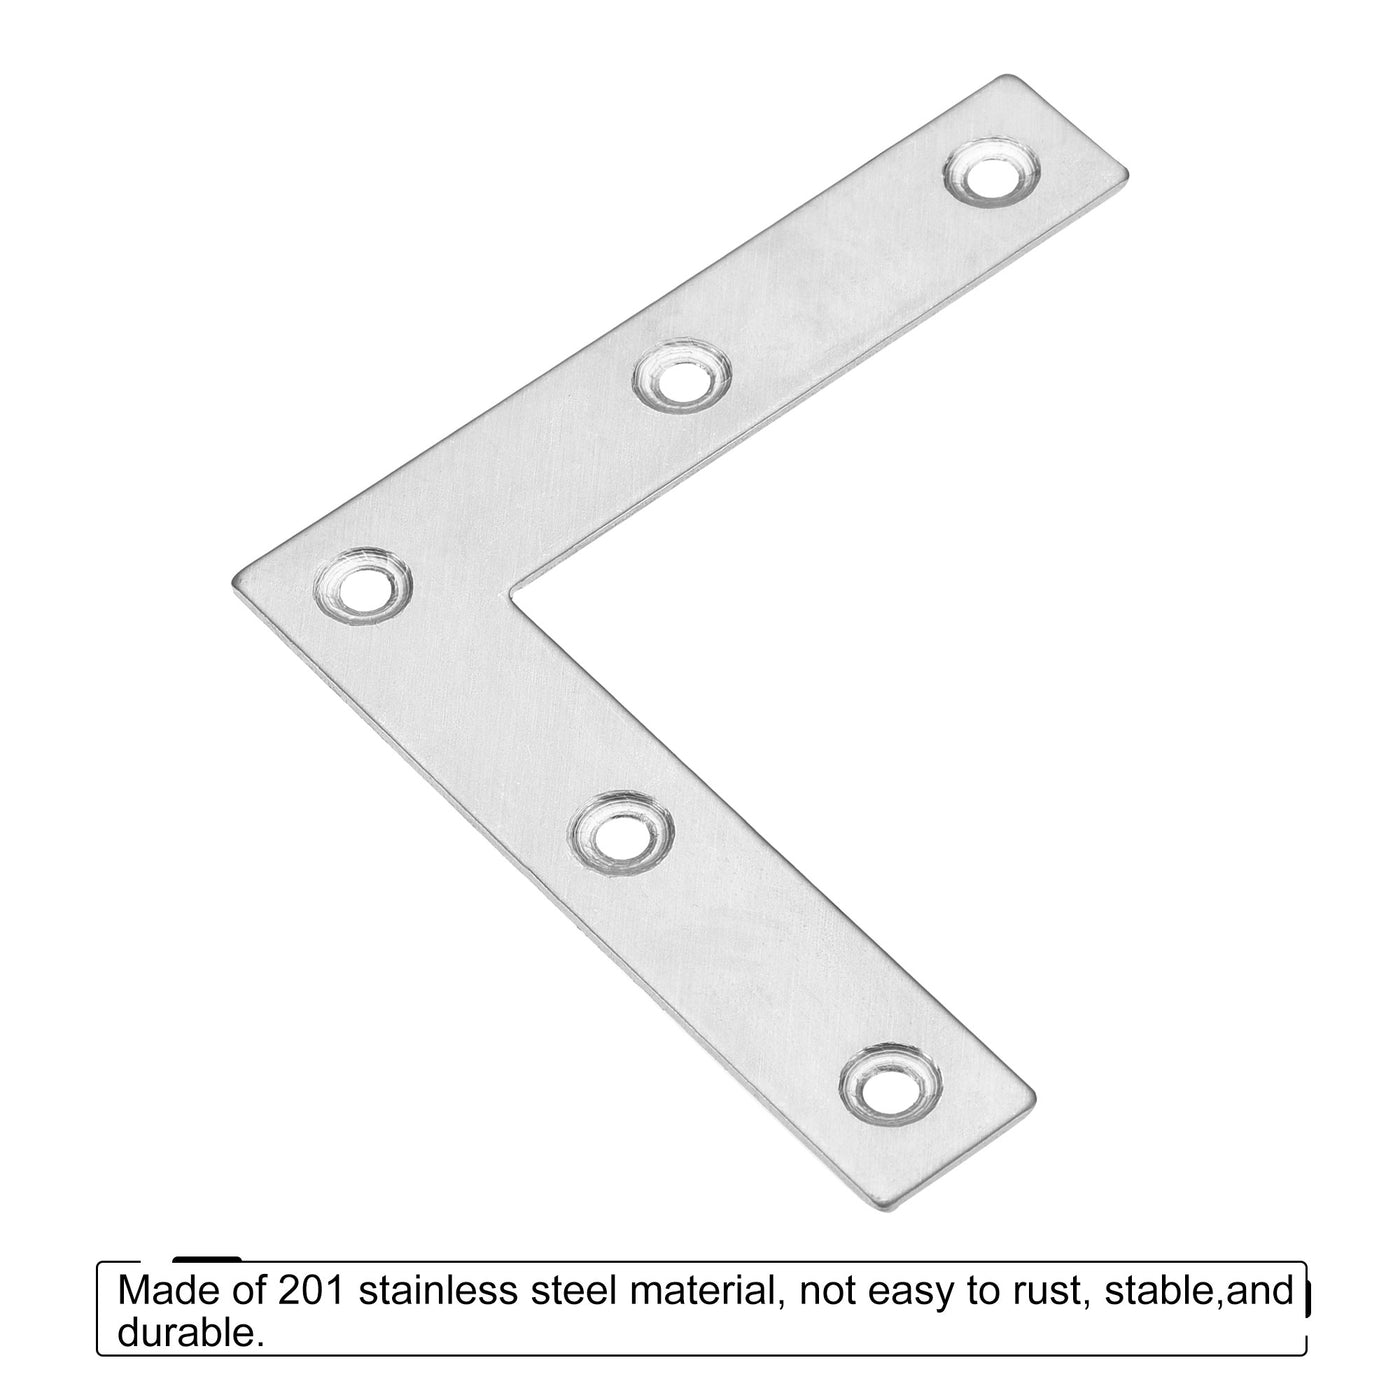 uxcell Uxcell L Shape Brace 80x80x1.3mm Stainless Steel Mending Repairing Flat Brackets for Joint Fastener with Screws 12Pcs